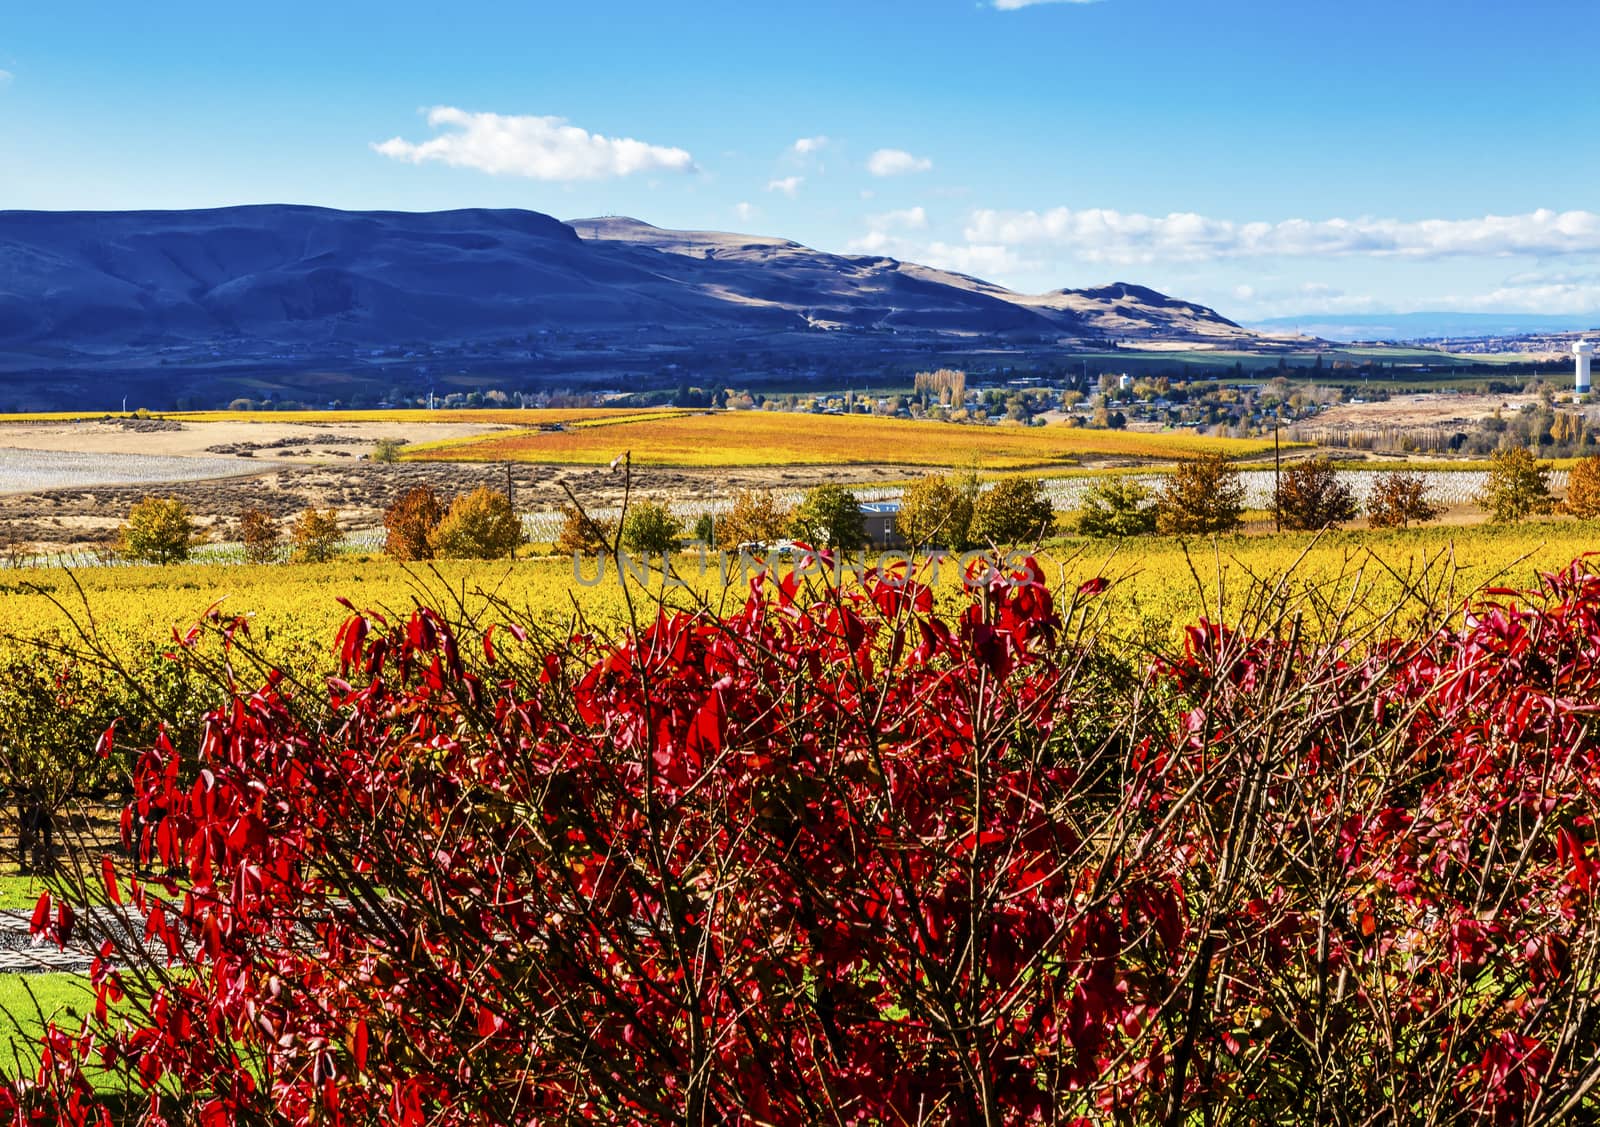 Red Leaves Bushes Yellow Leaves Vines Rows Grapes Wine Green Grass Autumn Red Mountain Benton City Washington